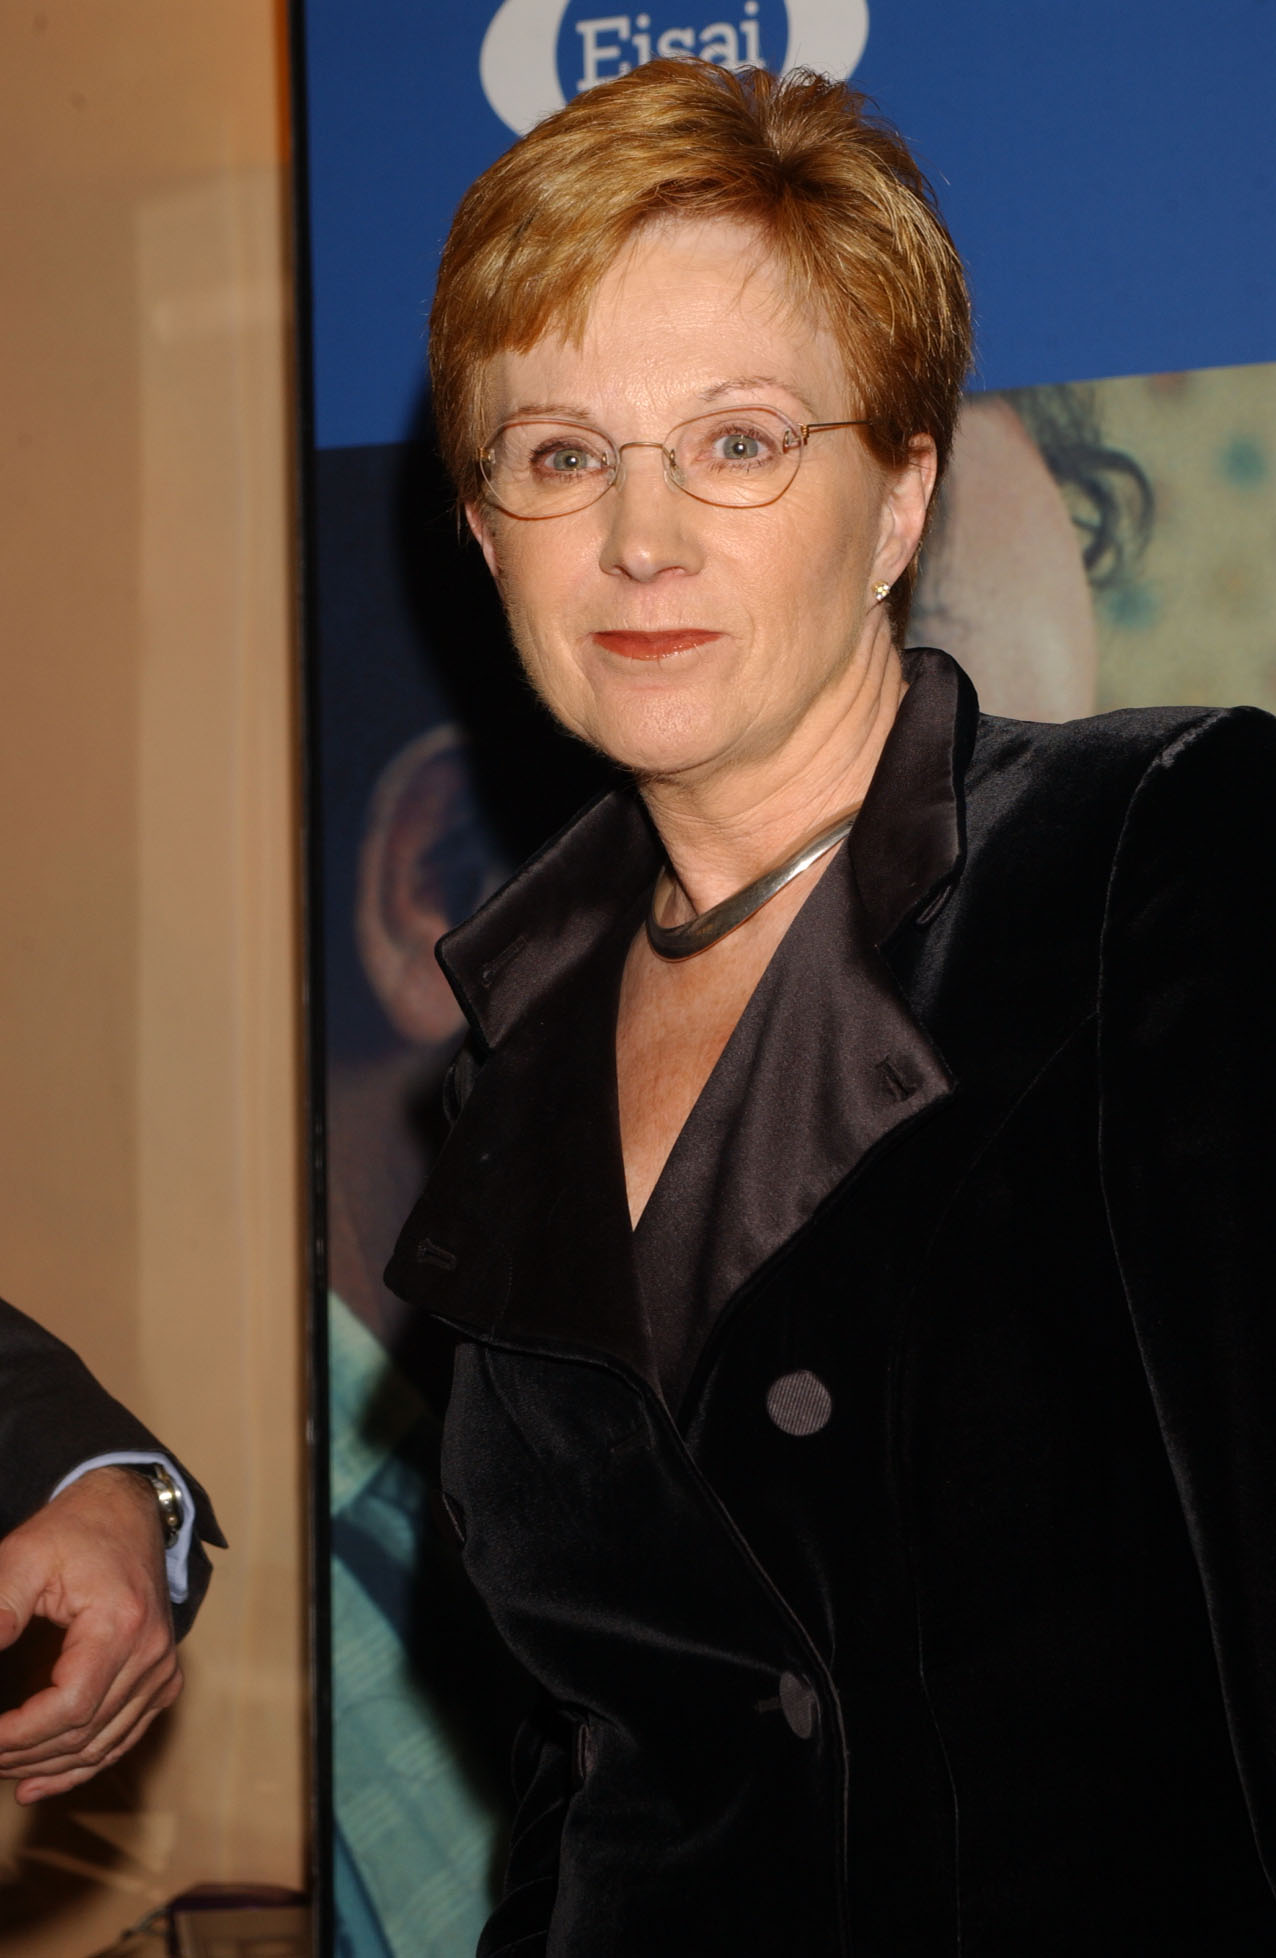 Anne Robinson during a press reception at the Washington Hotel in London, on January 13, 2002. | Source: Getty Images